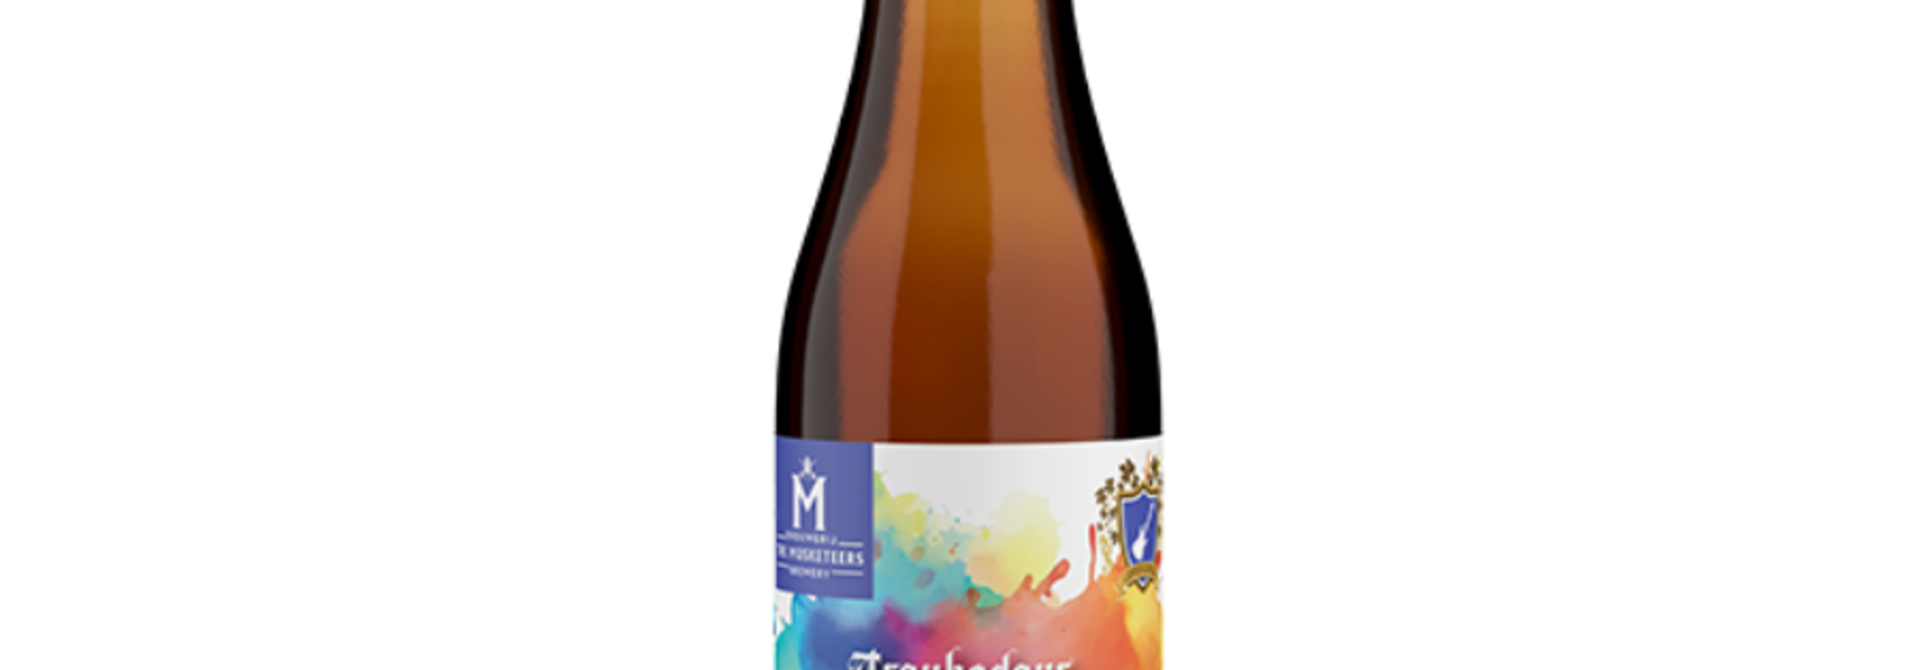 The Musketeers Troubadour Zestra 33cl 0,3%